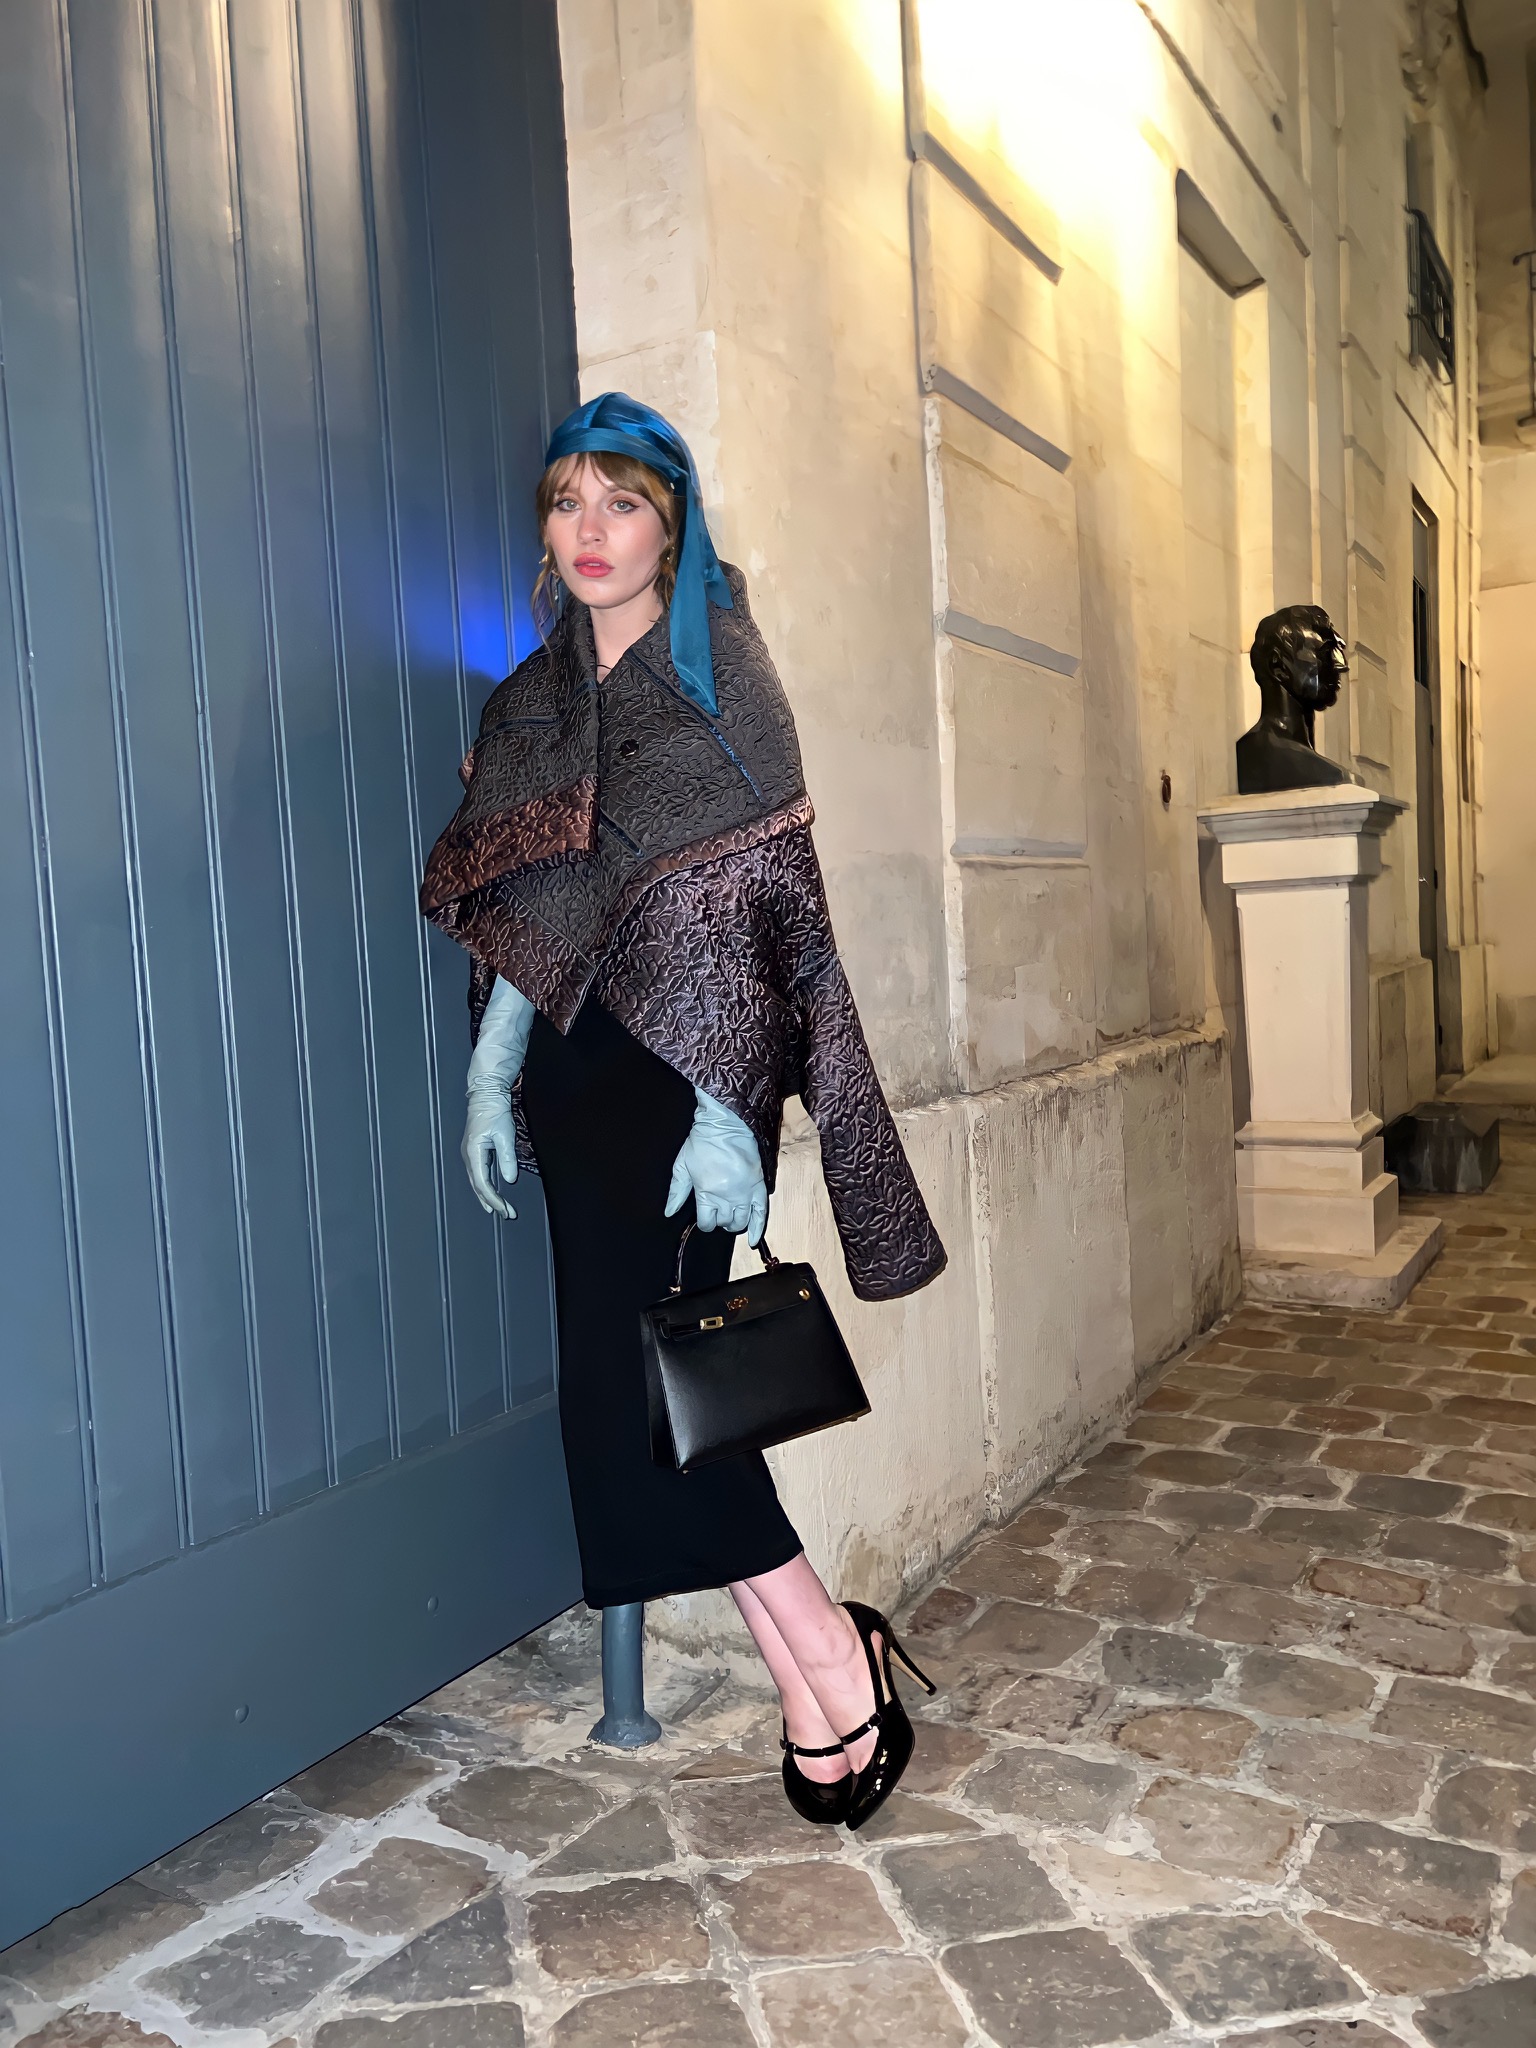 Ivy Getty Paris Couture Photo Diary